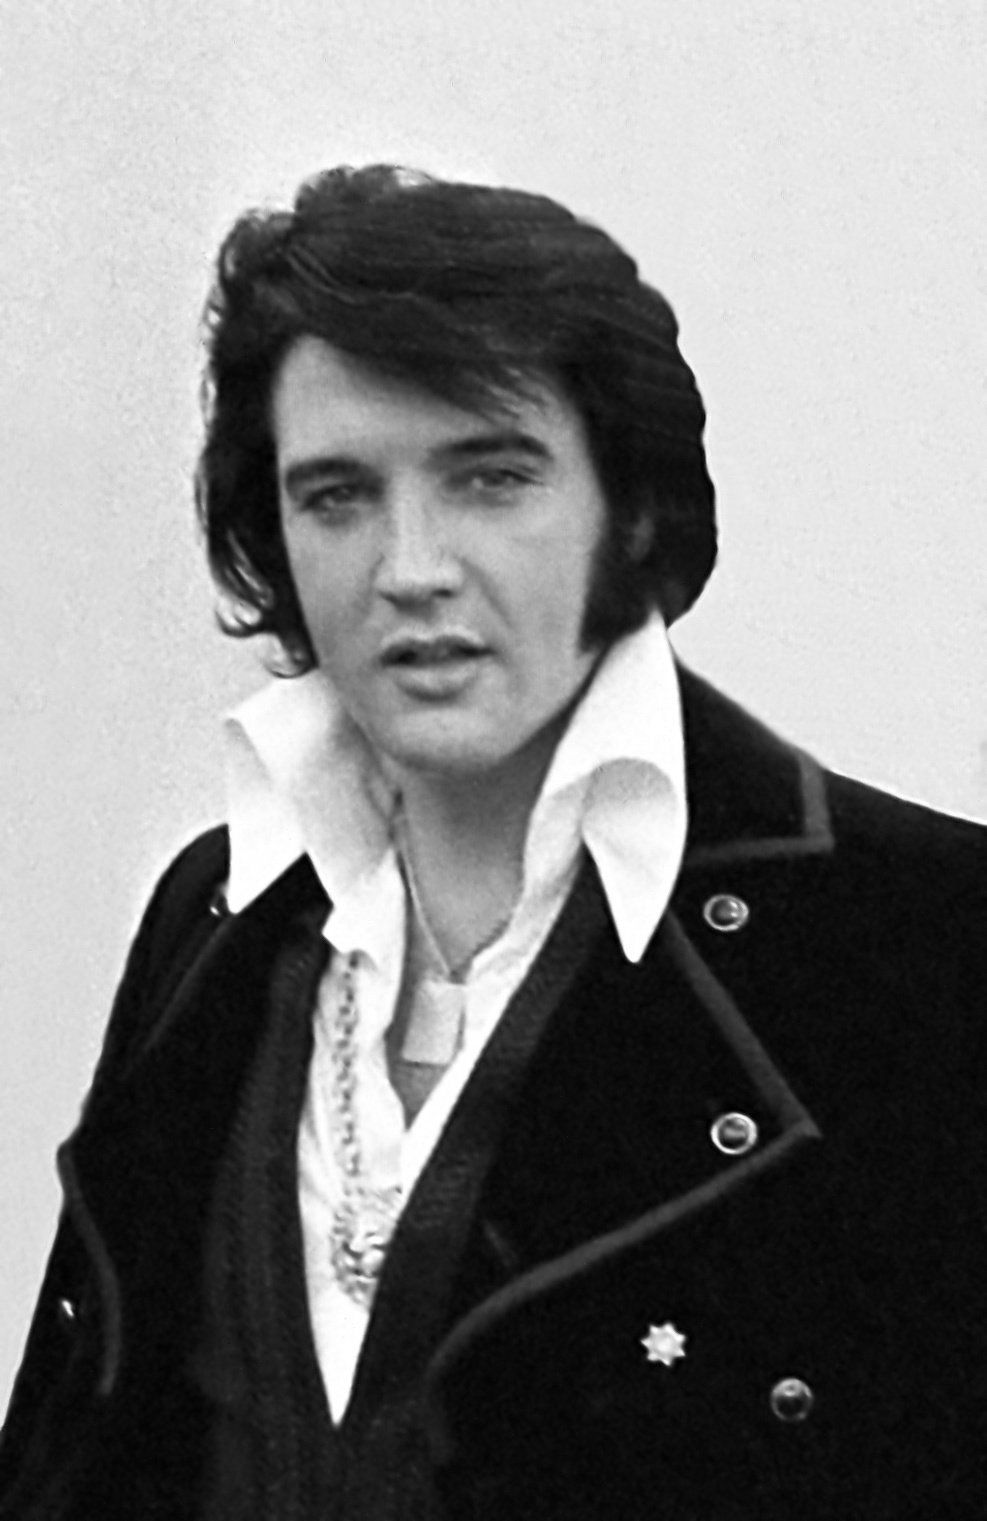 Elvis Presley at the White House, December 21, 1970. | Photo: Wikimedia Commons